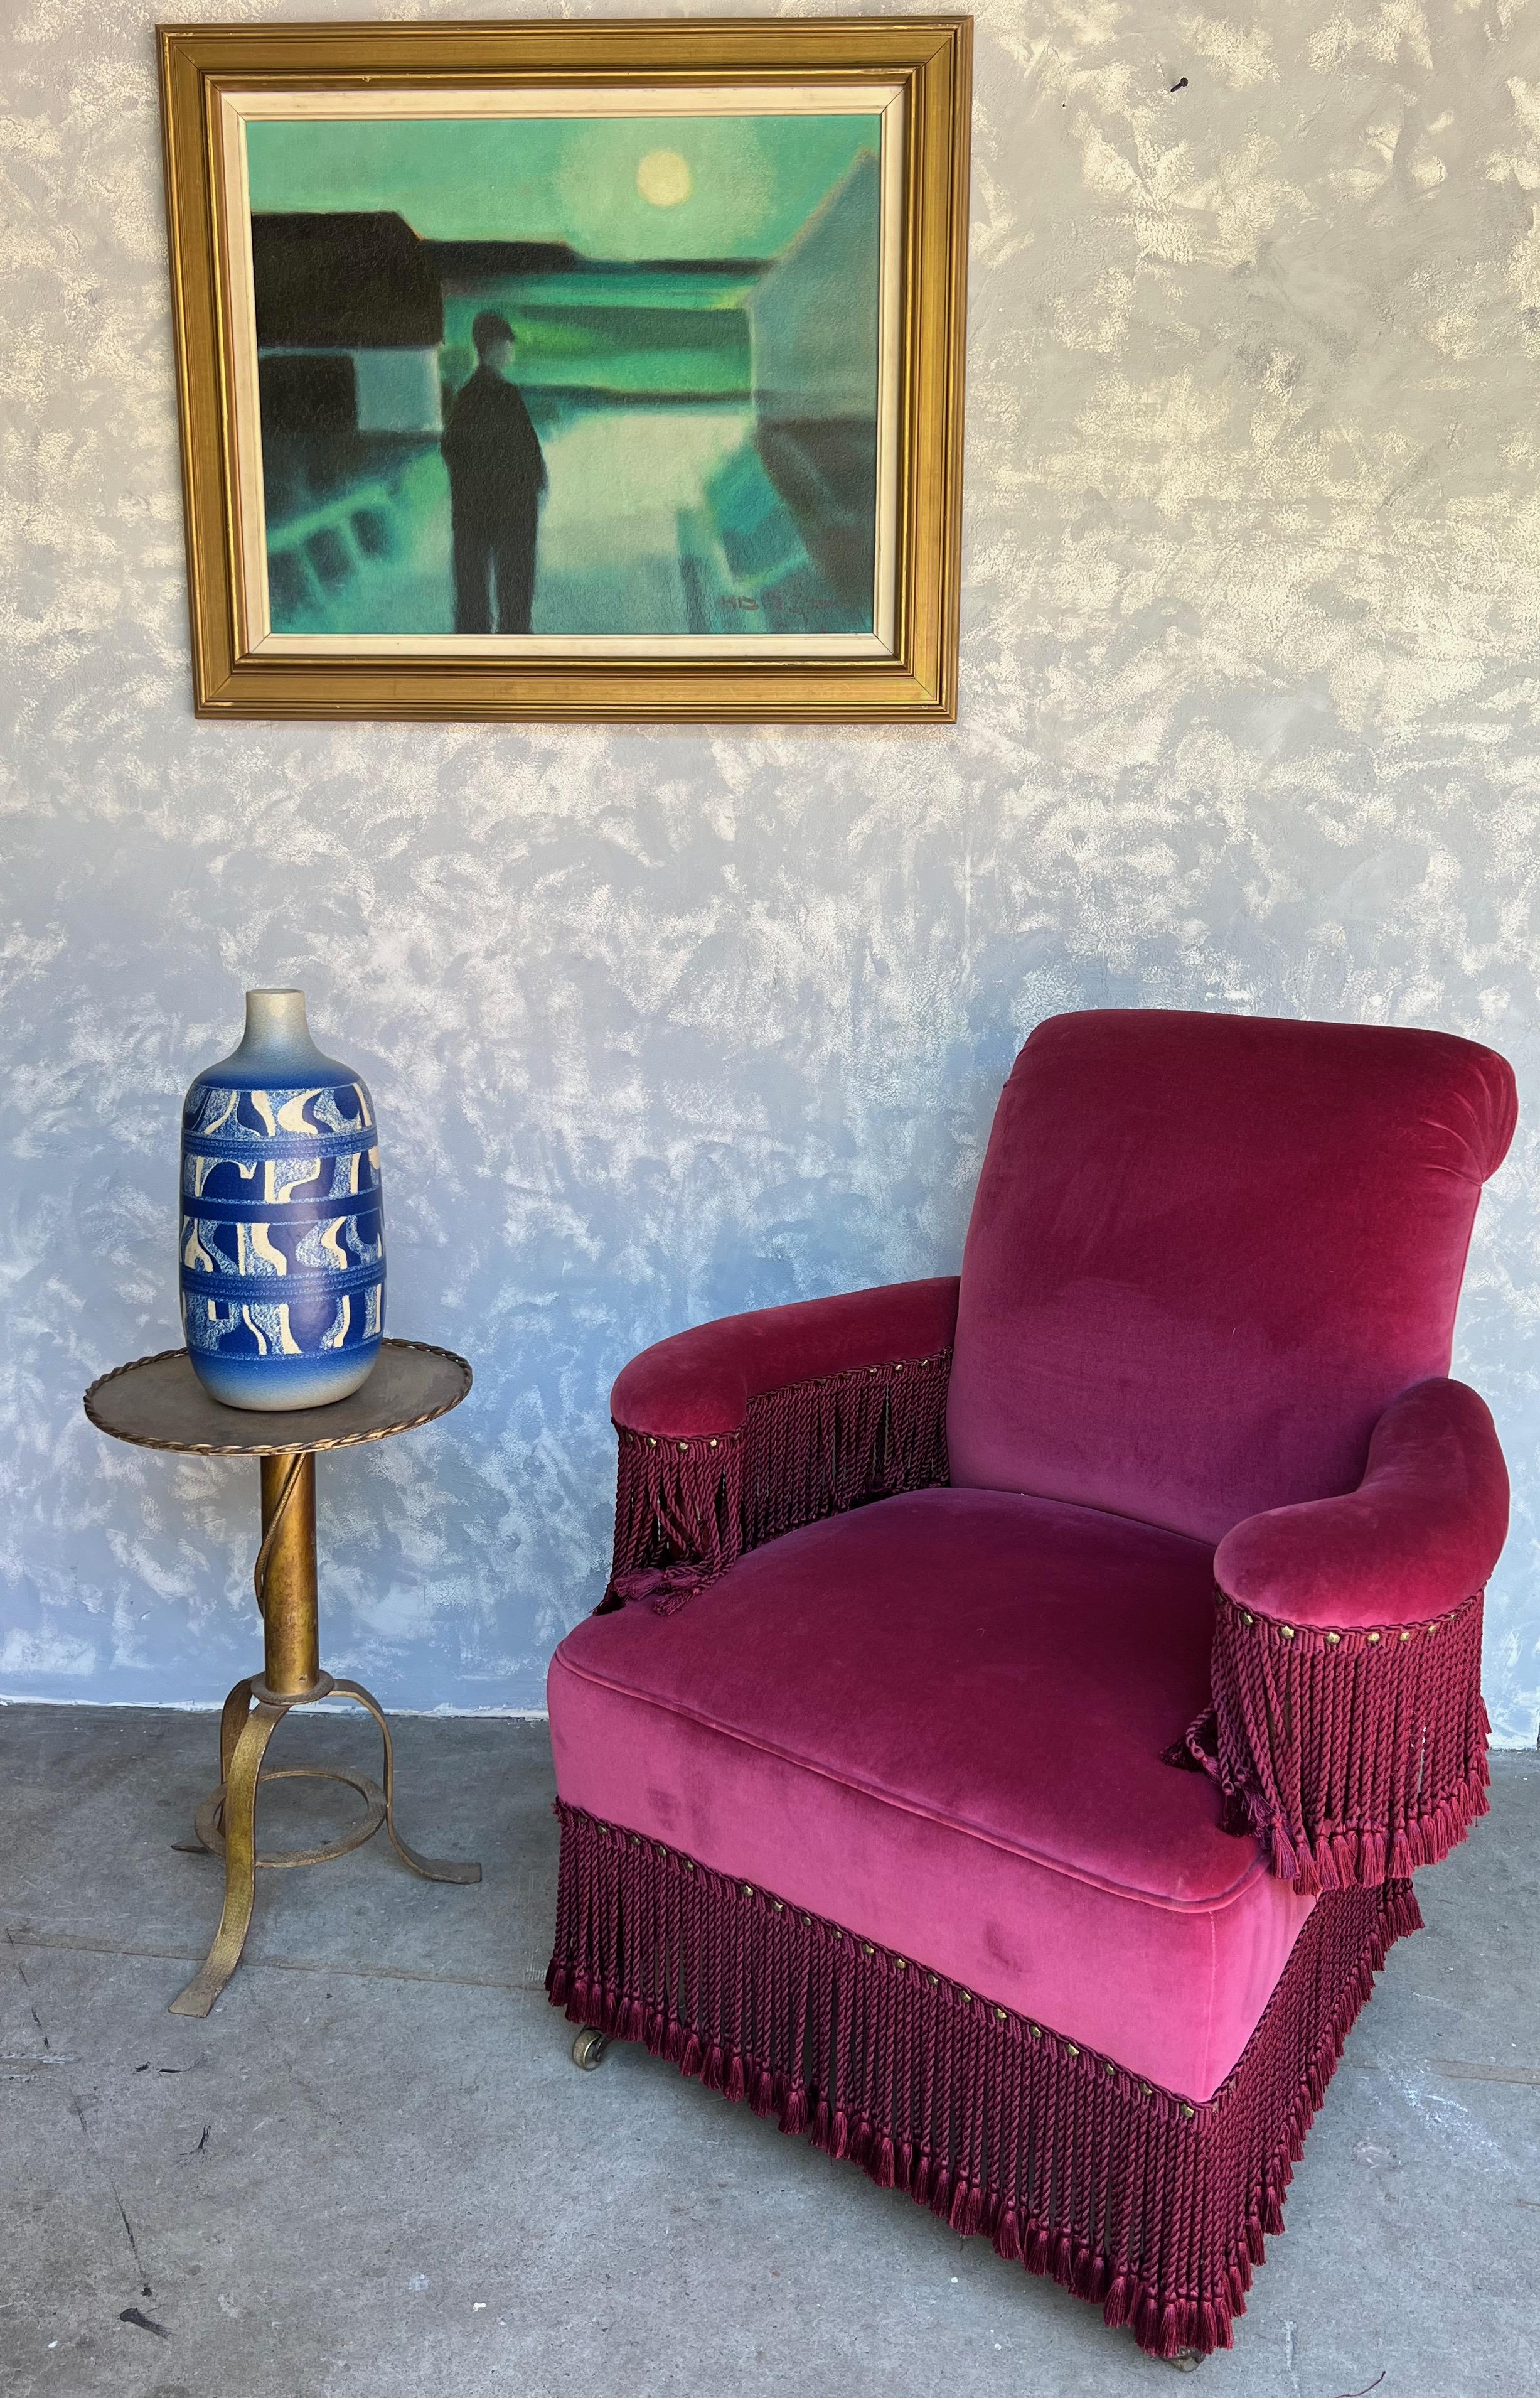 A very unusual armchair in the French style that is upholstered in a rich burgundy and trimmed with matching bouillon fringe the arms as well as at the bottom. The chair is in very good vintage condition and can be used as is. Most likely made in